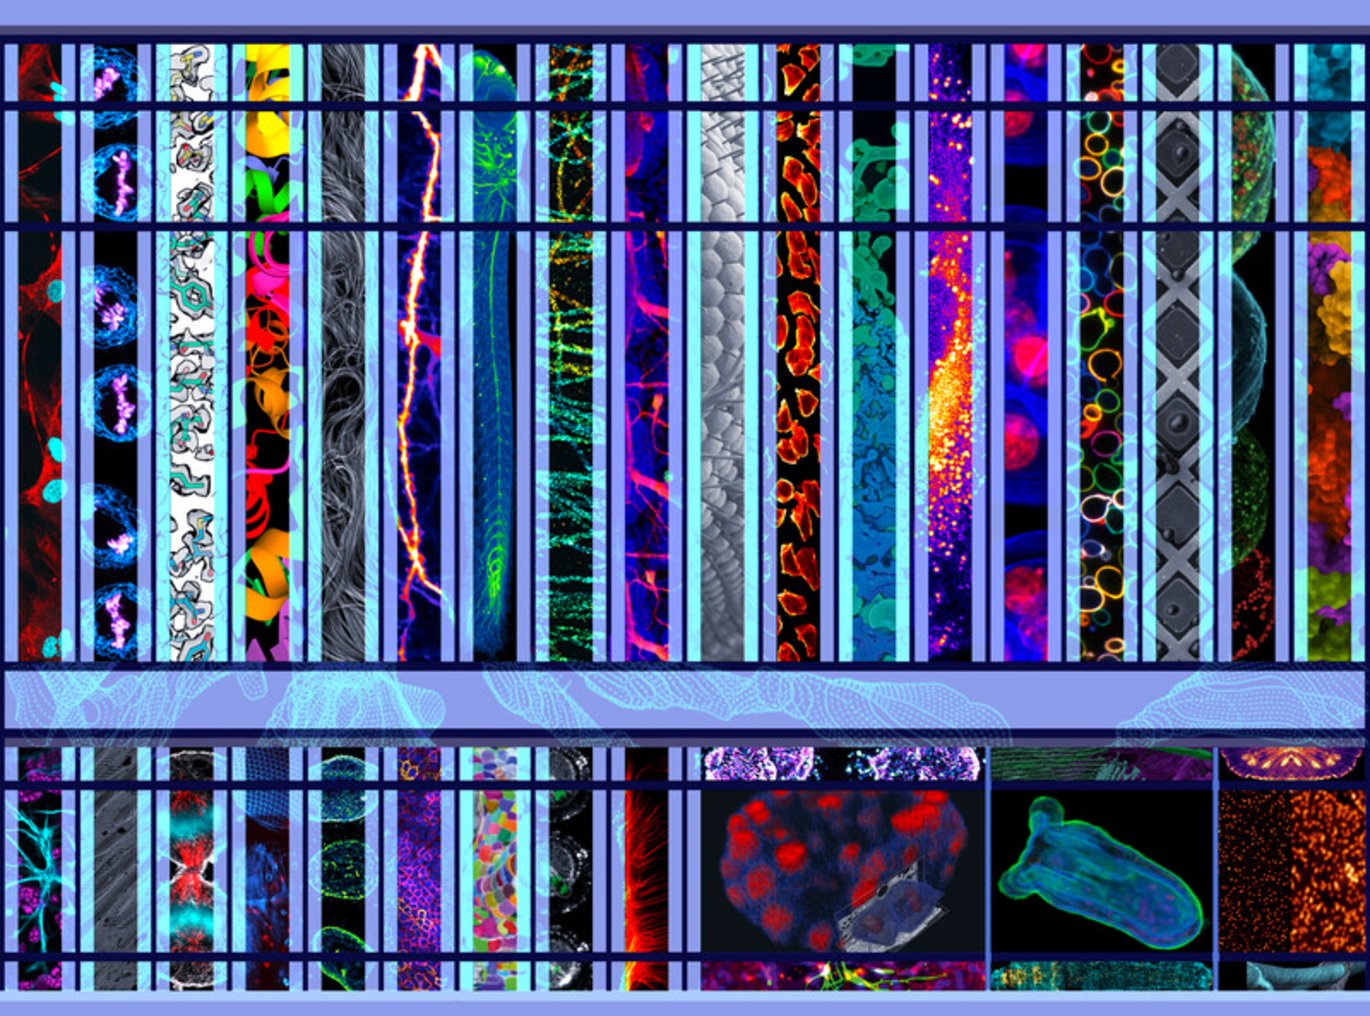 A picture with 30 microscopy panels of various colors showing cells and cellular compartments.